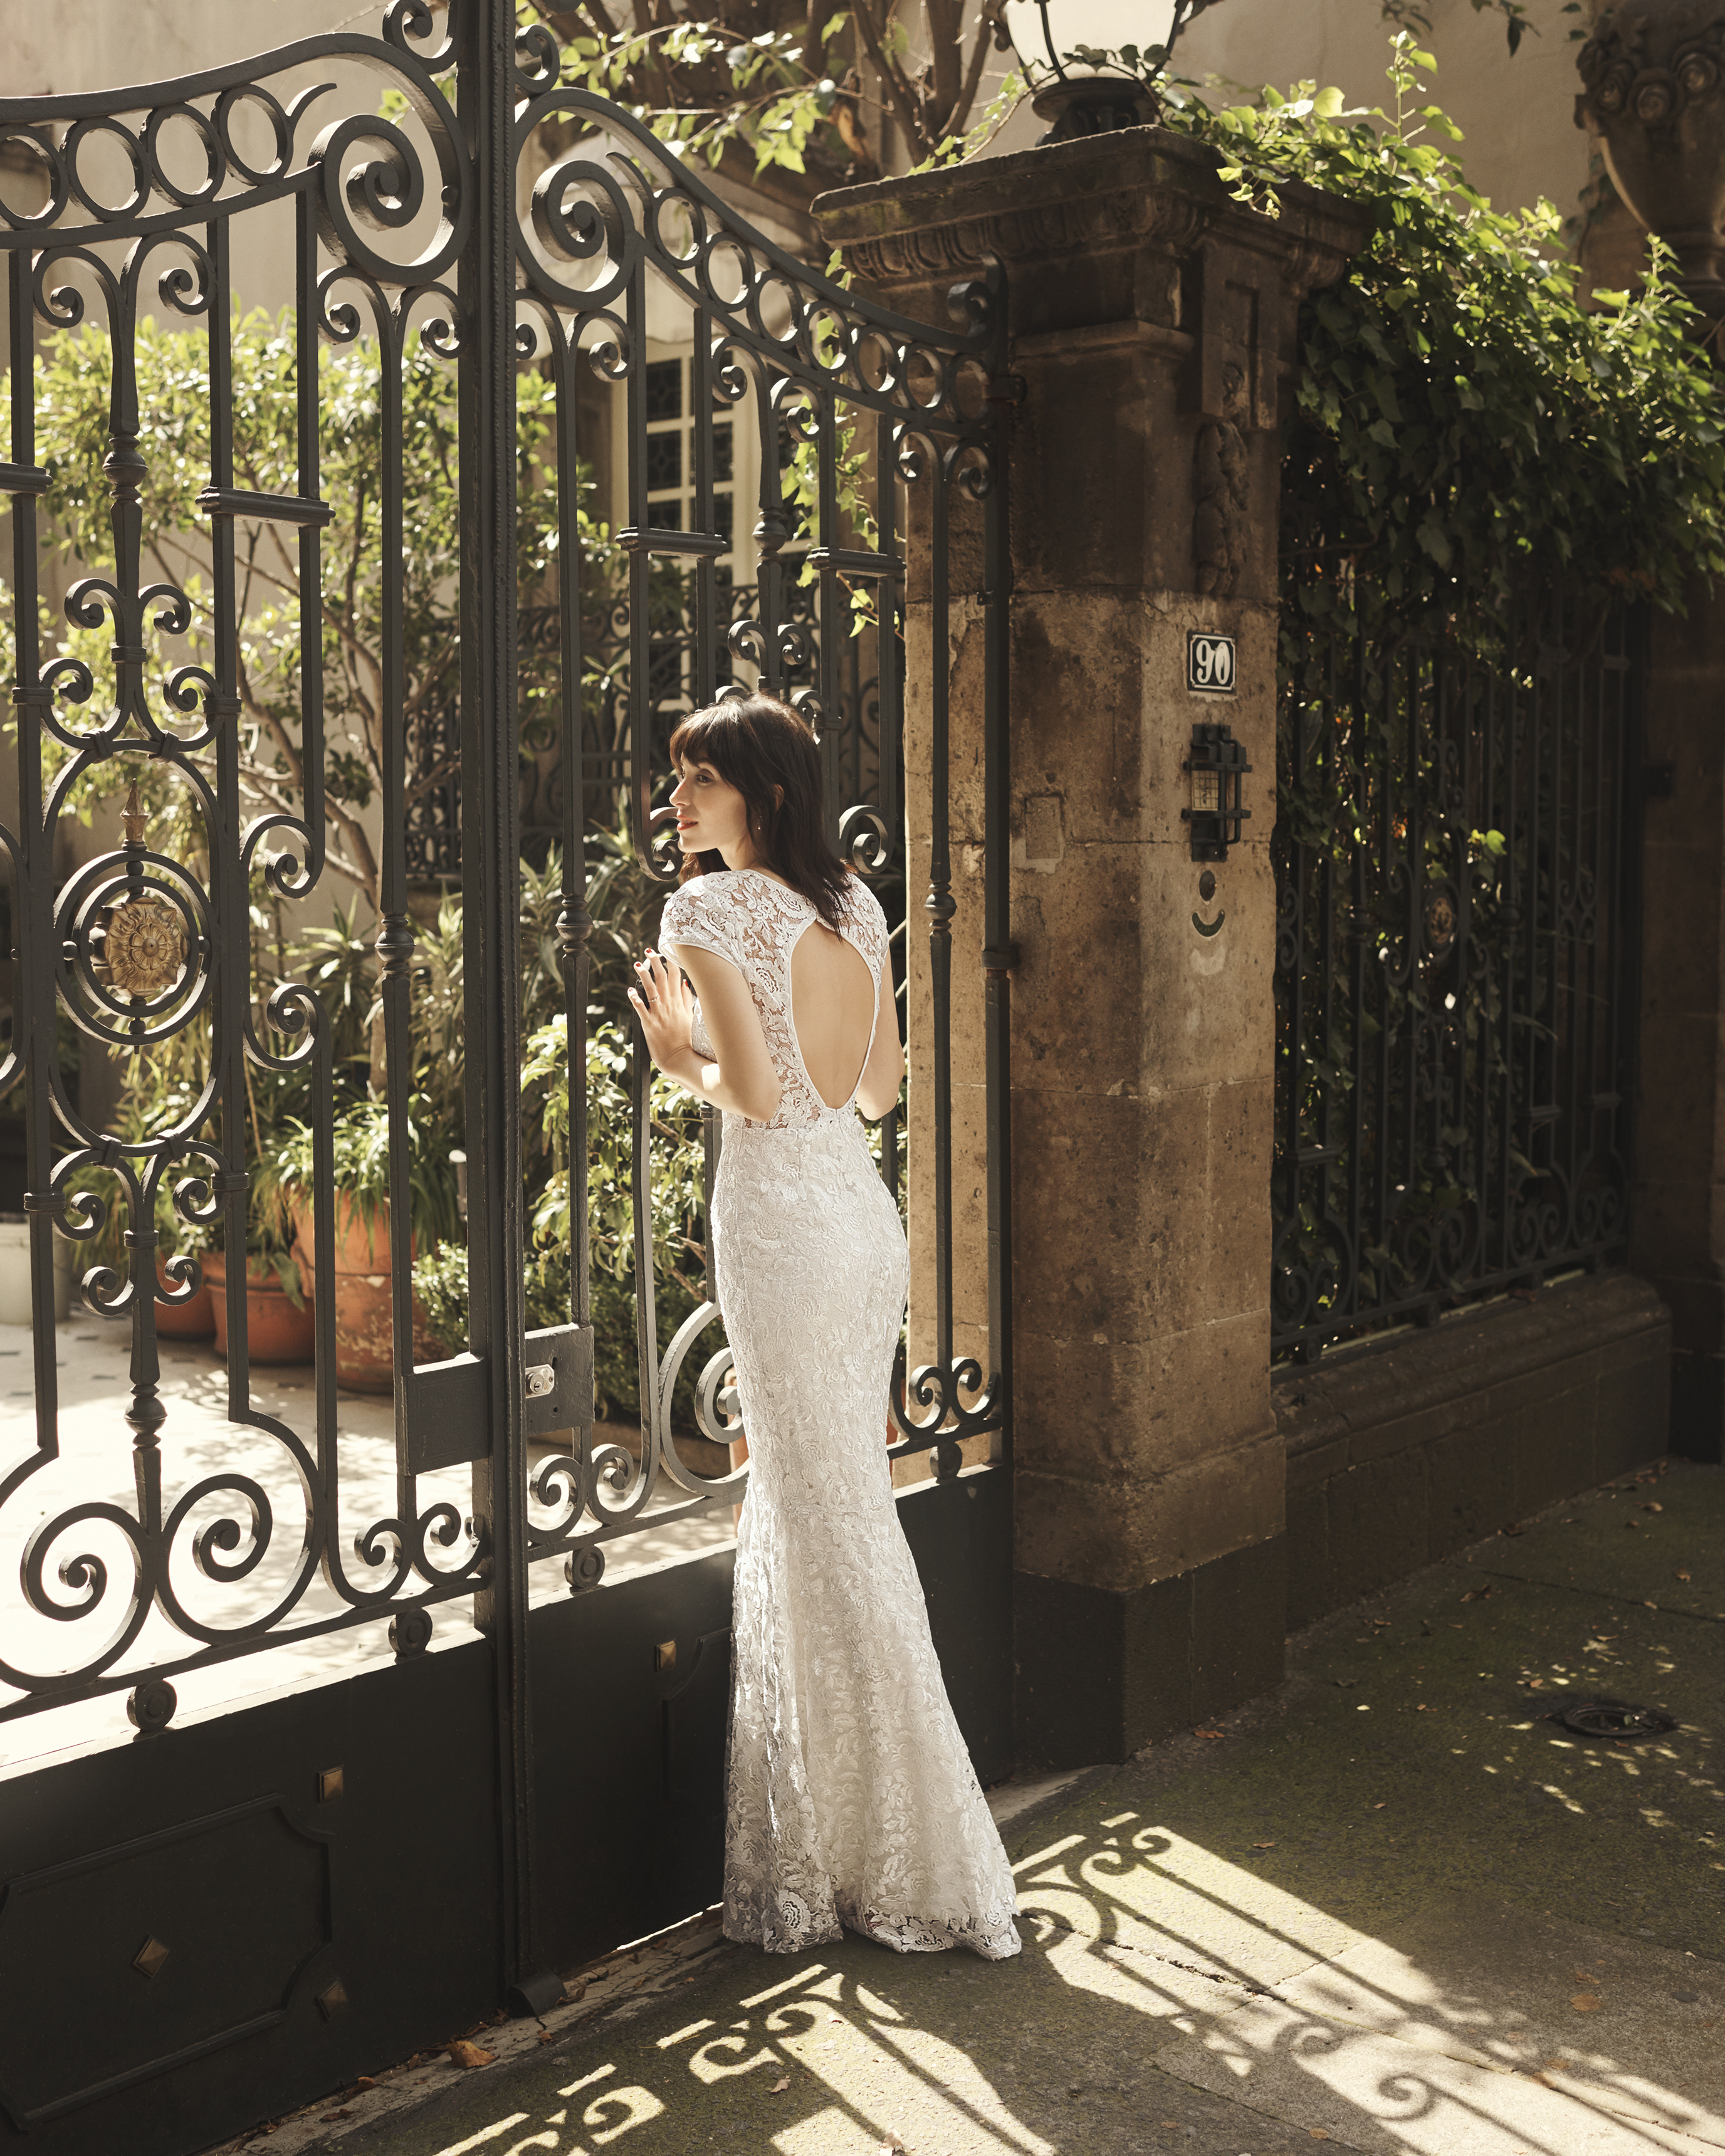 Bride standing in front of ornate gate in cutout long wedding dress